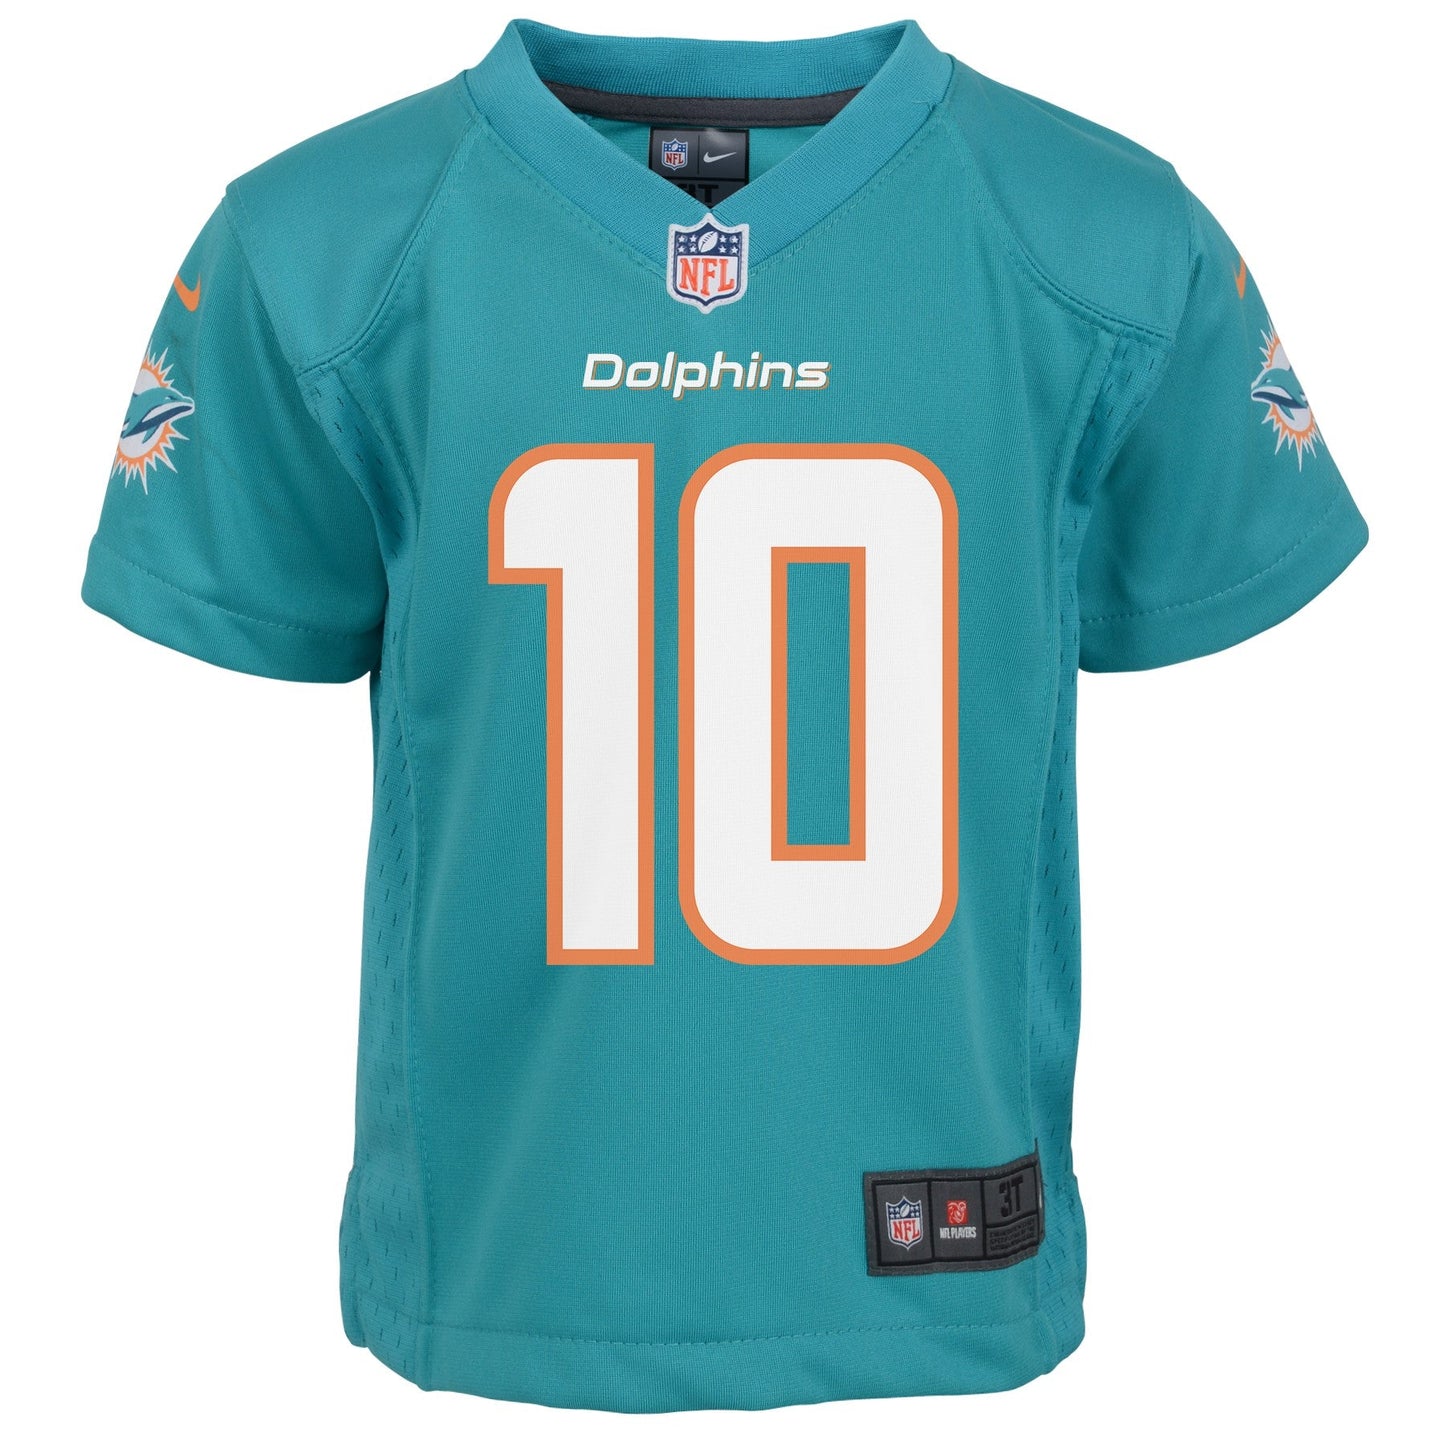 Kids Tyreek Hill Miami Dolphins Teal Child Nike Replica Jersey